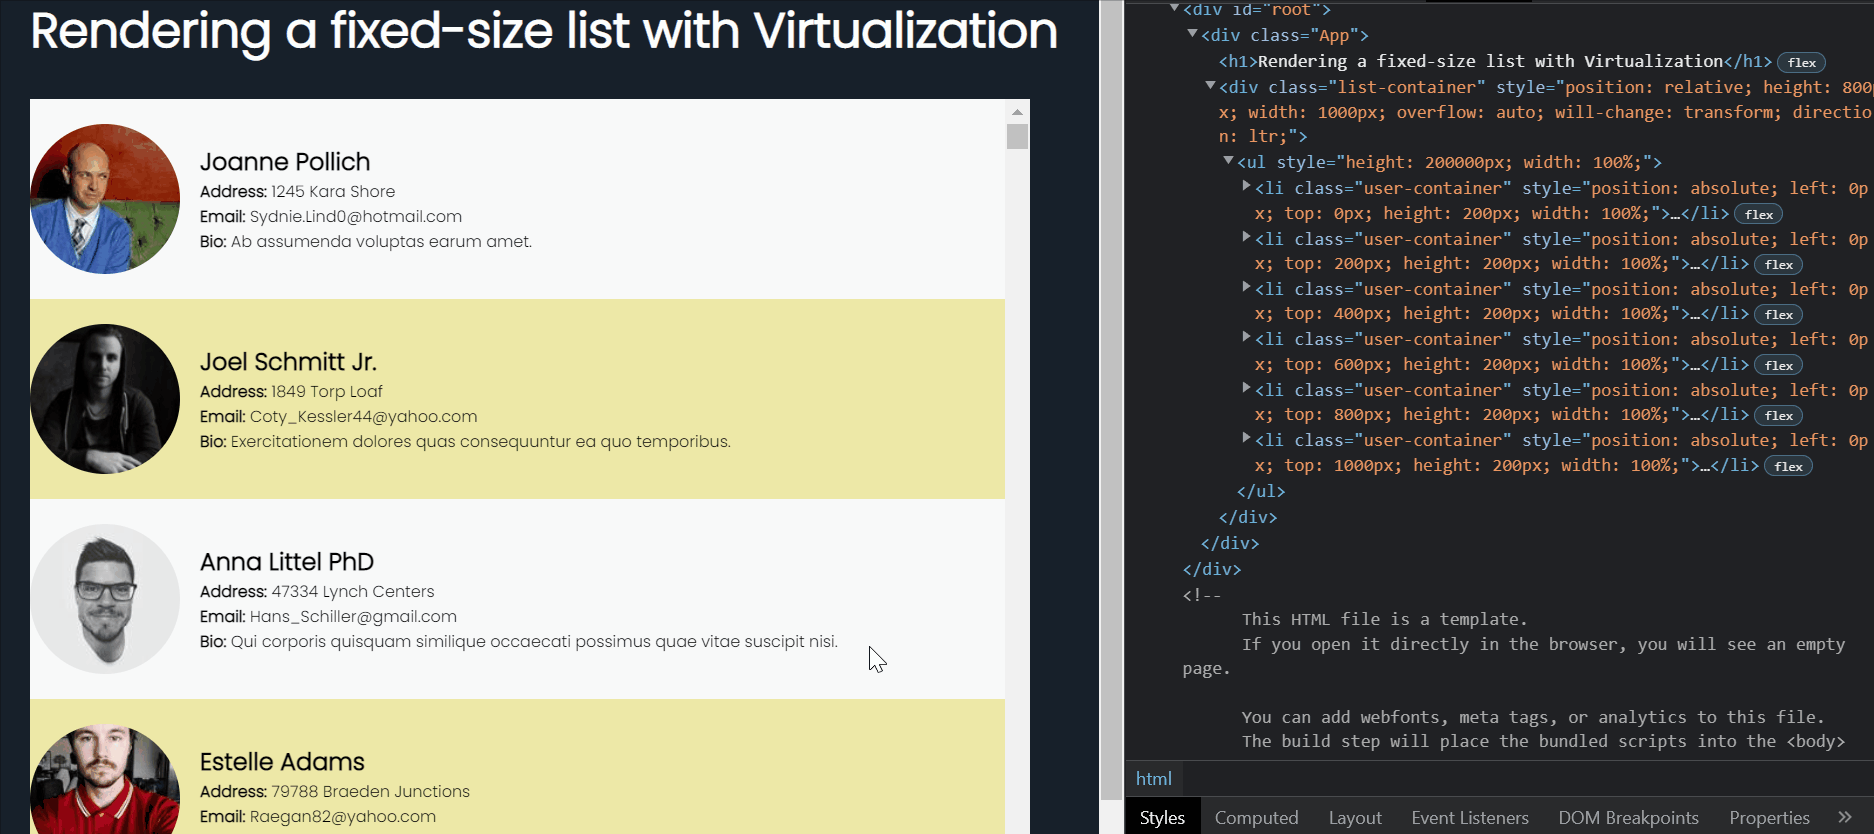 Rendering a fixed-size list with virtualization